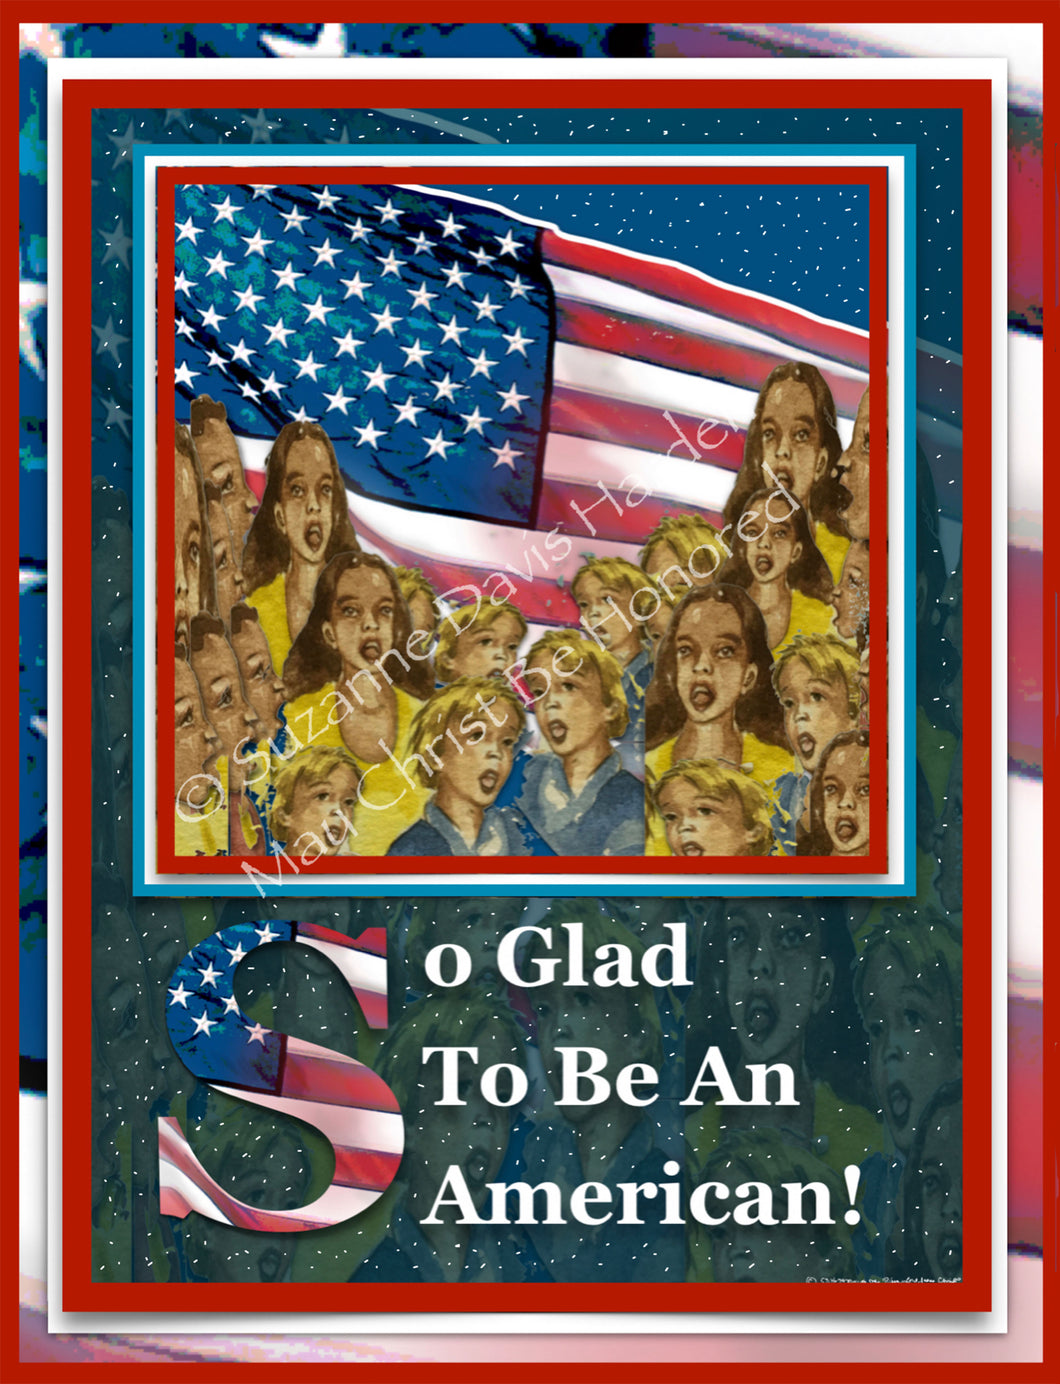 Digital Download Glad To Be An American Easy To Share Greeting by Suzanne Davis Harden